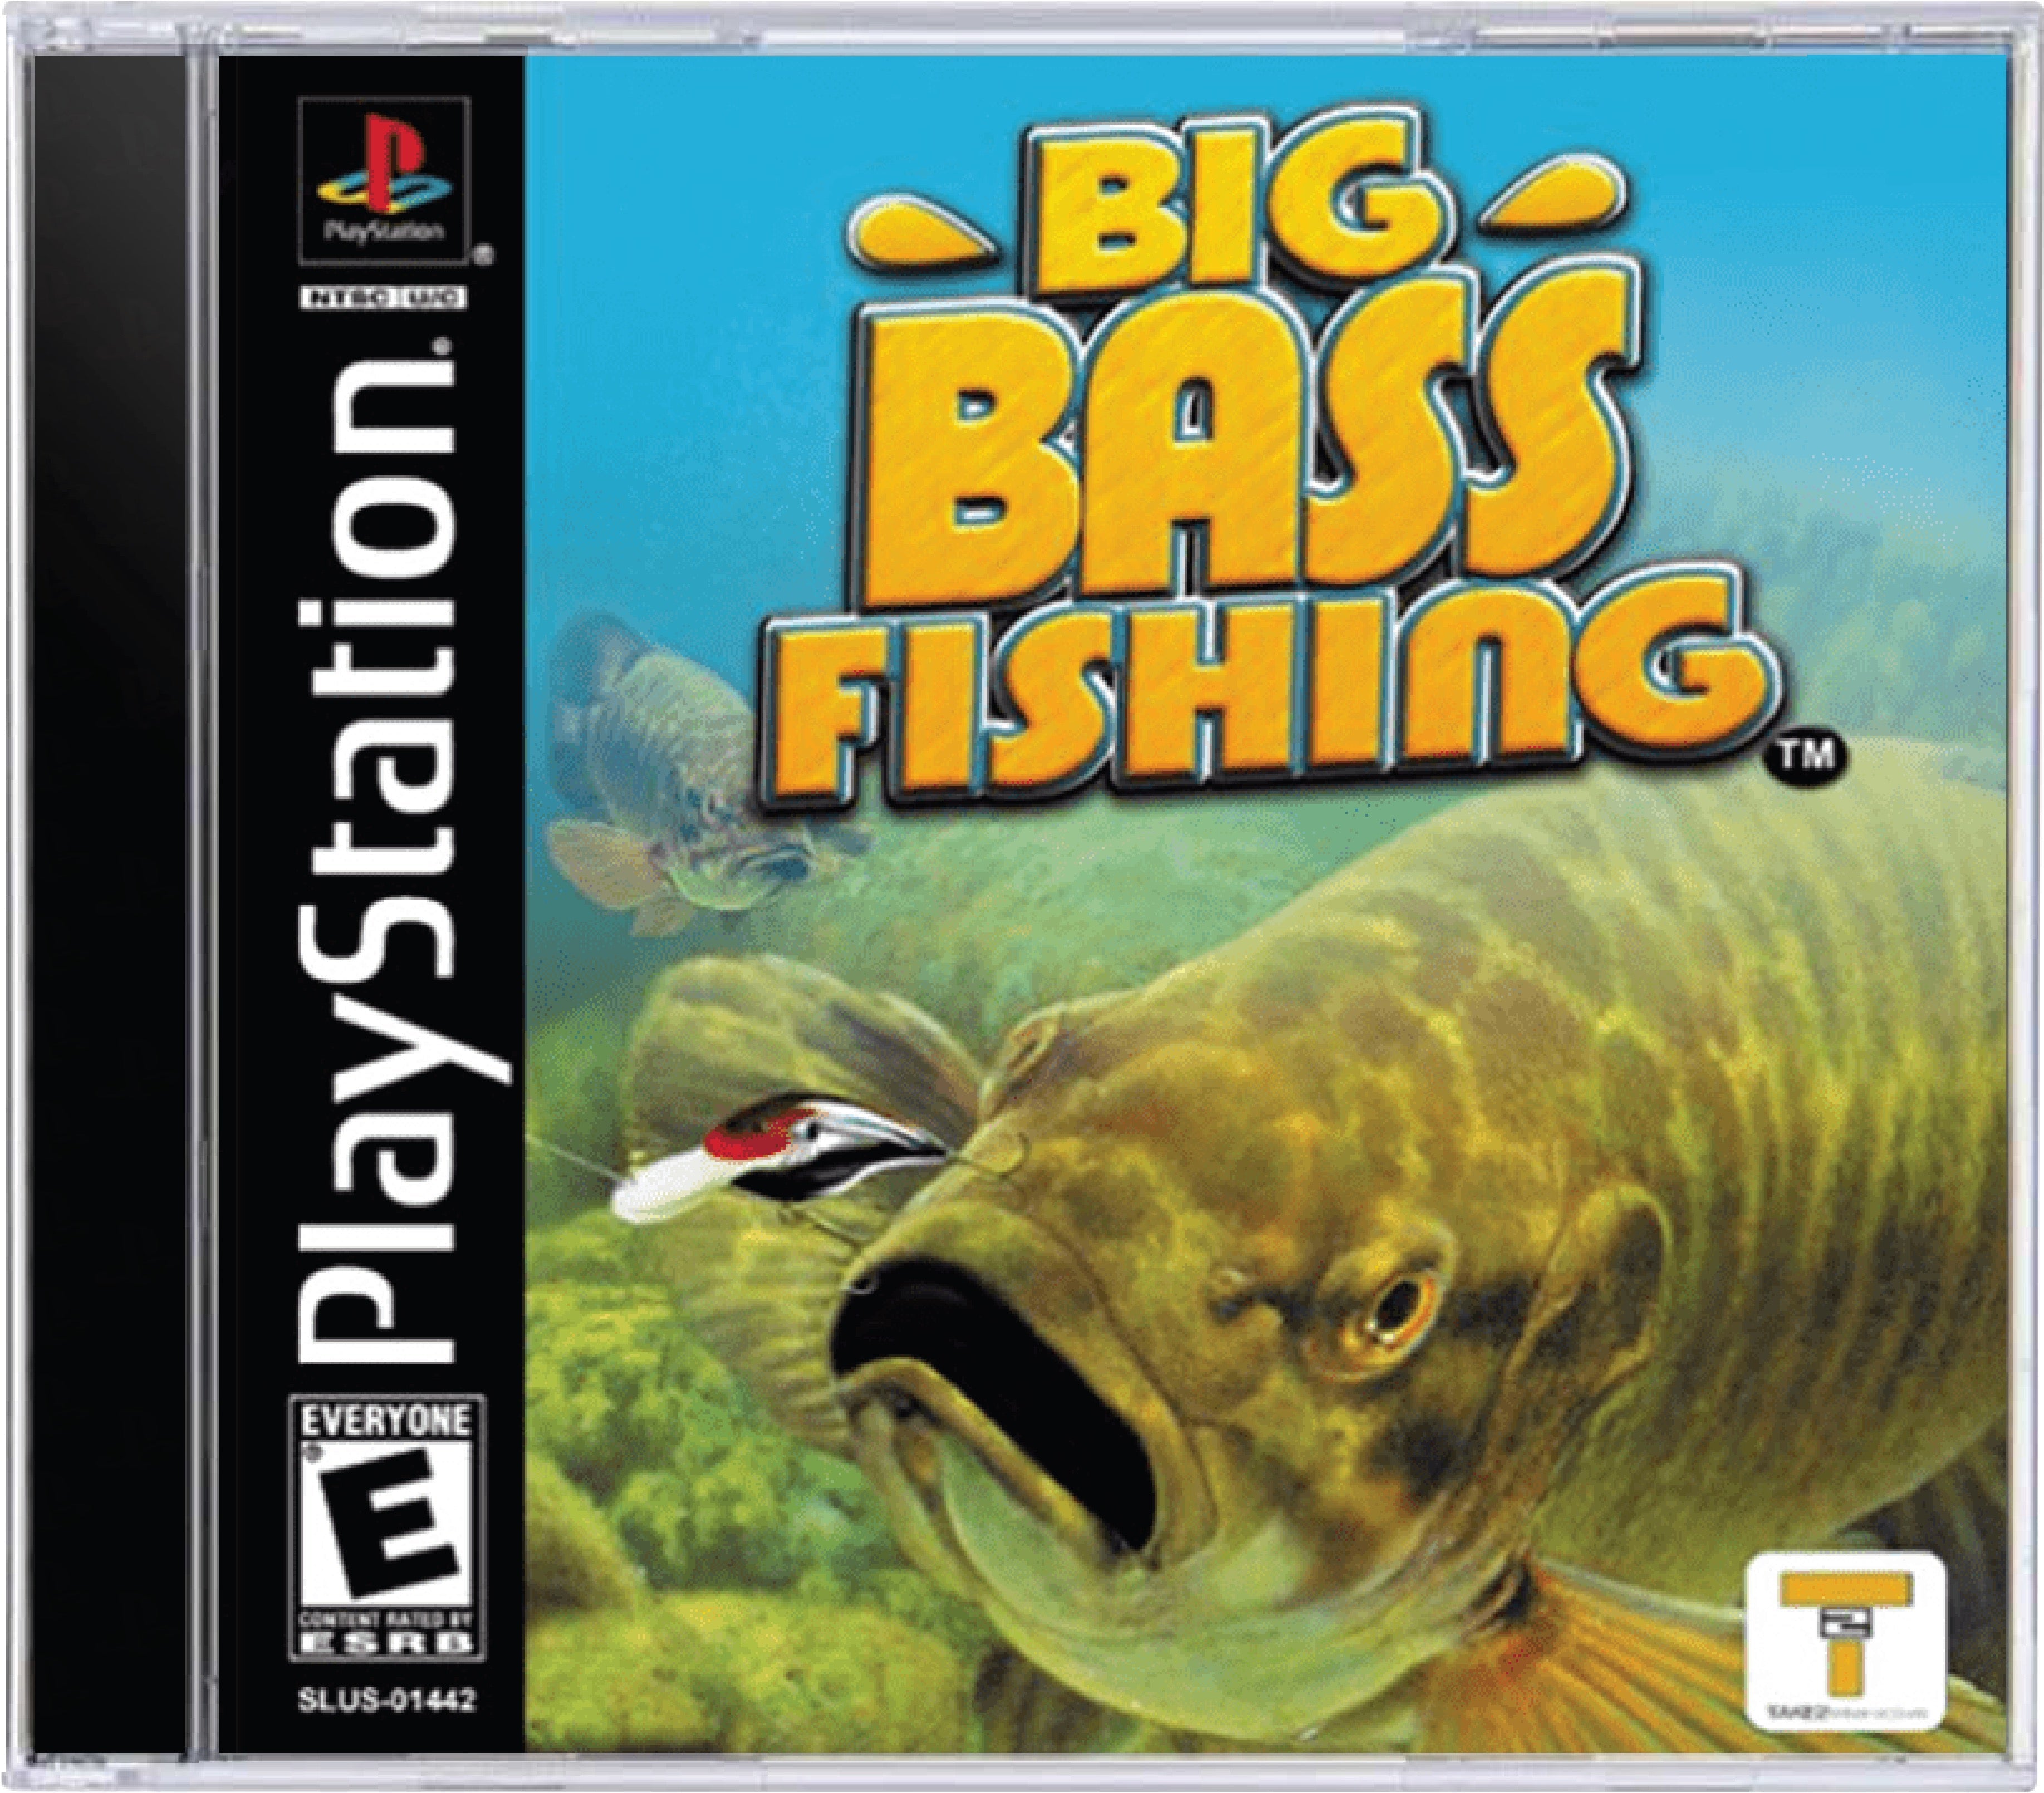 Big Bass Fishing Cover Art and Product Photo